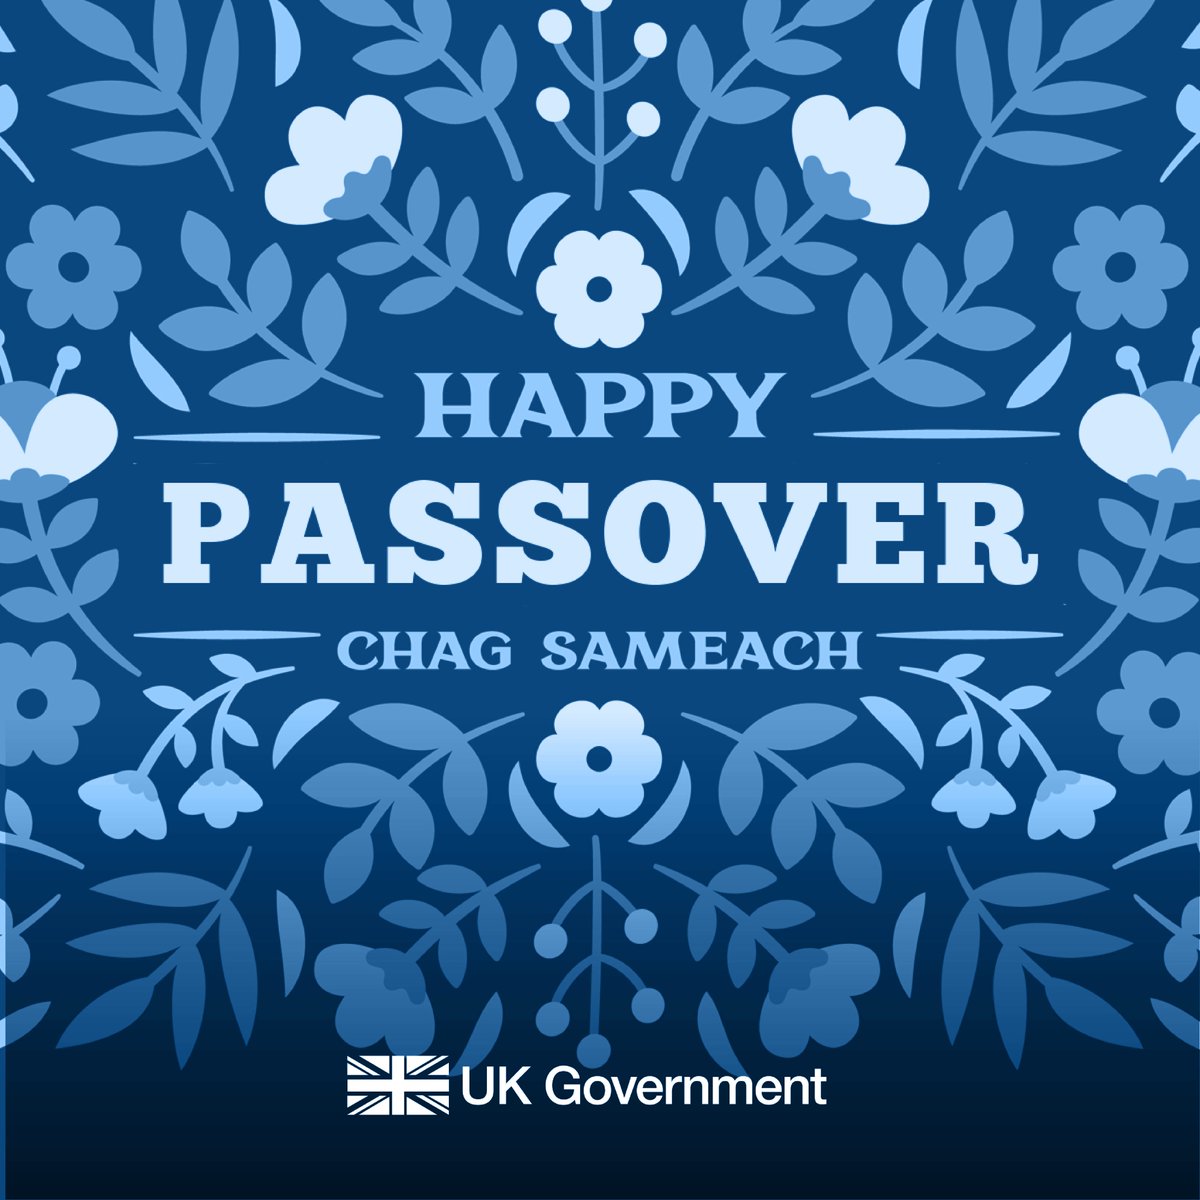 I extend my best wishes to Jewish communities in the UK 🇬🇧, Israel 🇮🇱 , and around the world 🌍 as #Passover begins. A time for families to come together in reflection and prayer. May this be a time for renewal and new beginnings - with prayers for peace. #ChagPesachSameach